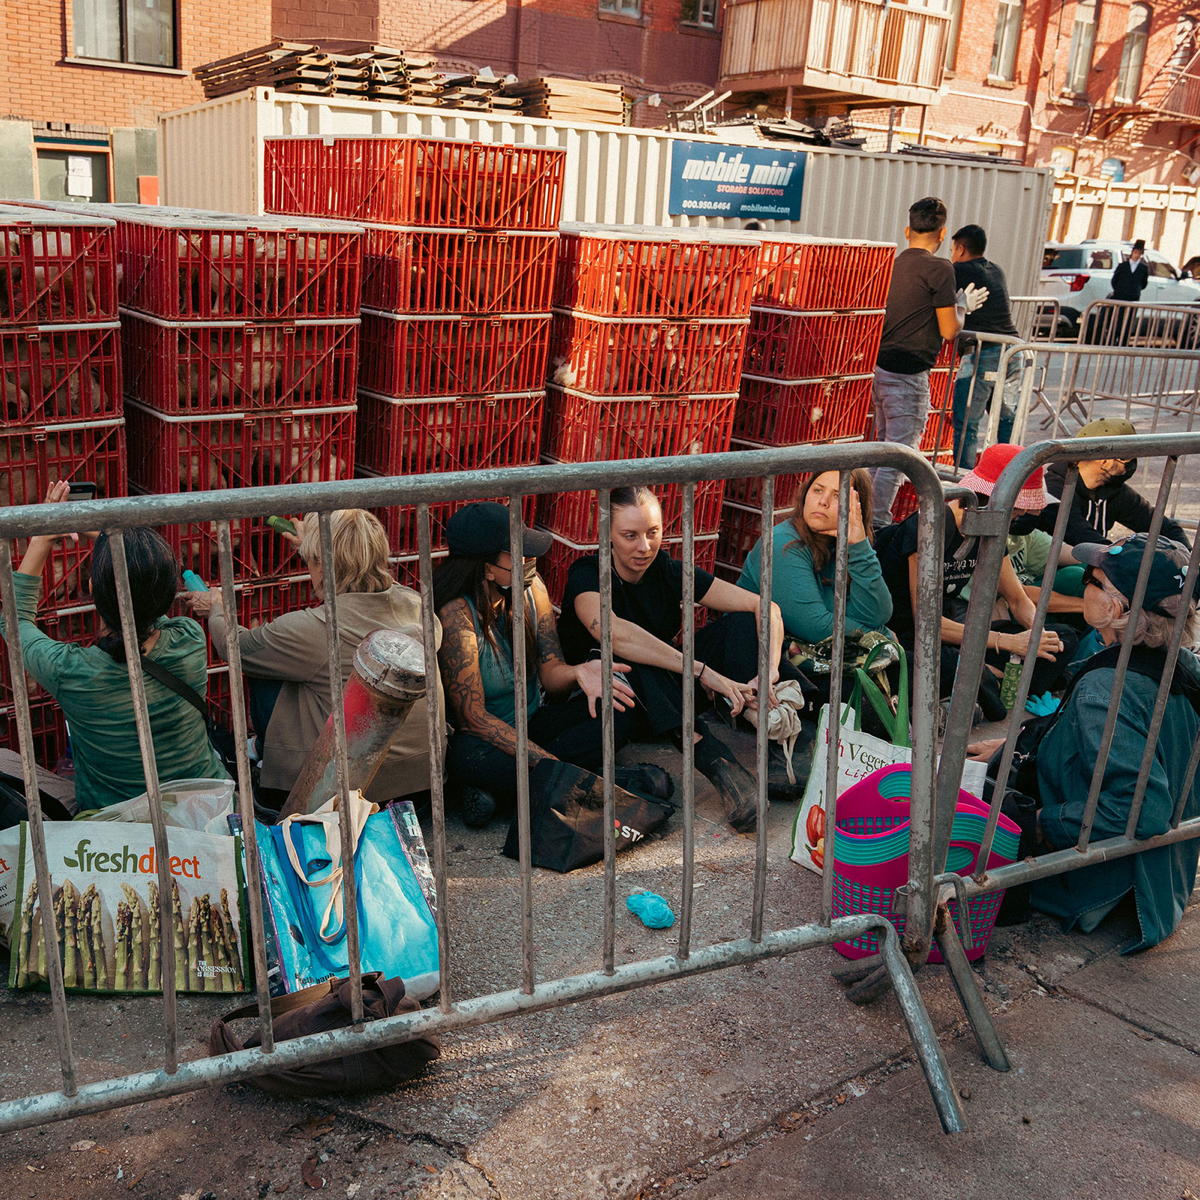 Activists sitting next to chickens in cages